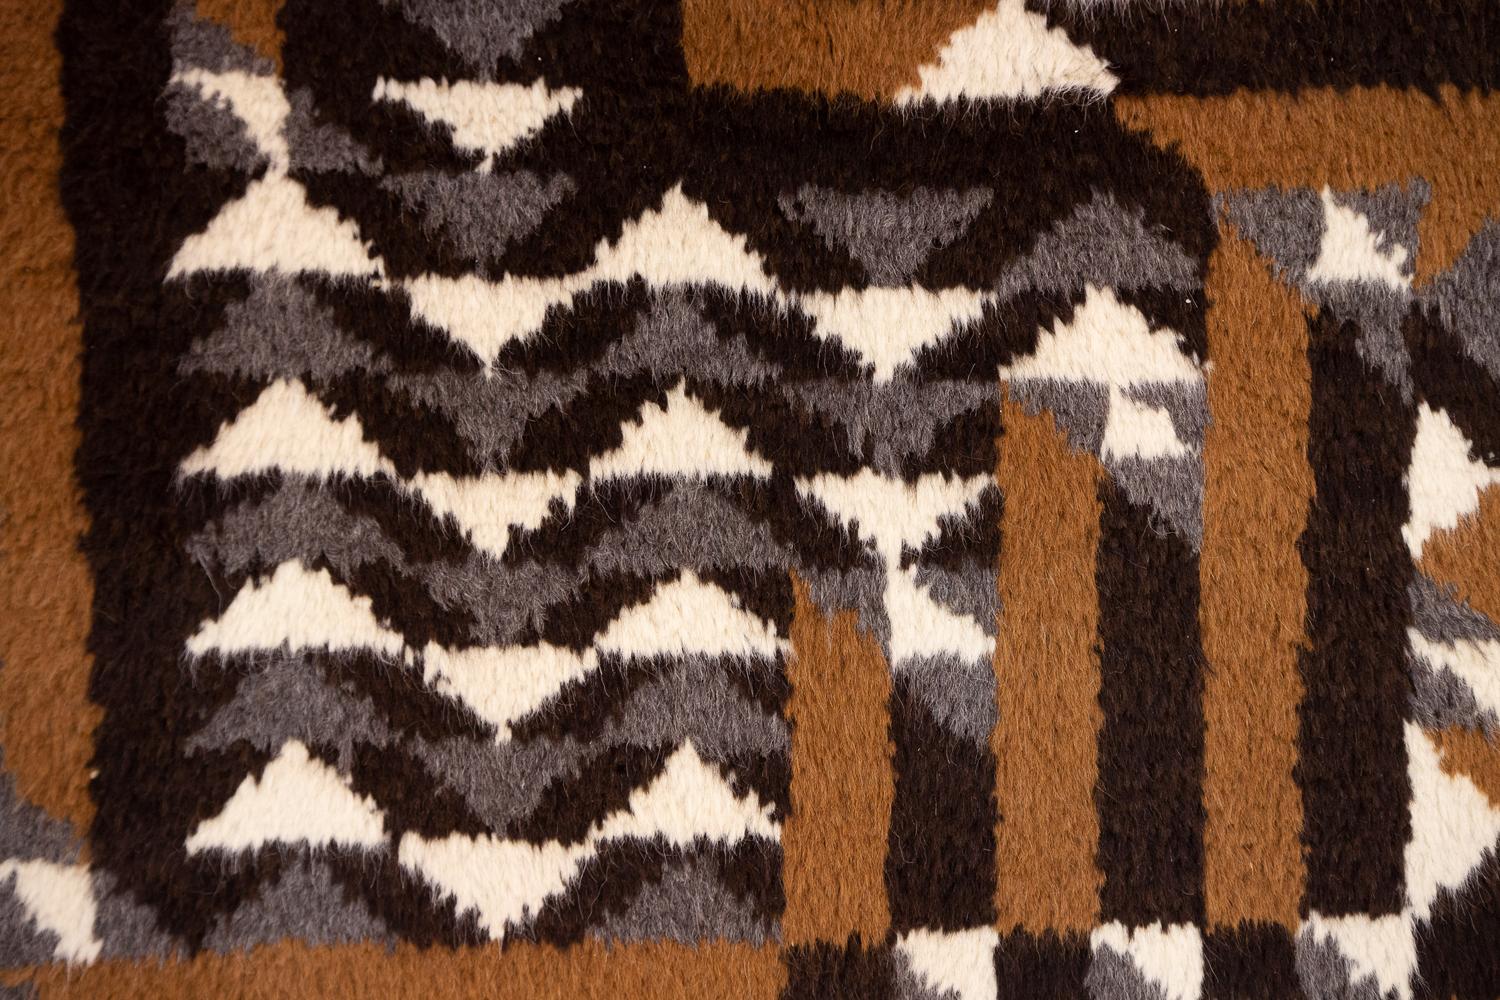 20th Century Art Deco European Rug with Checkerboard and Labyrinth Design, 1920-1950 For Sale